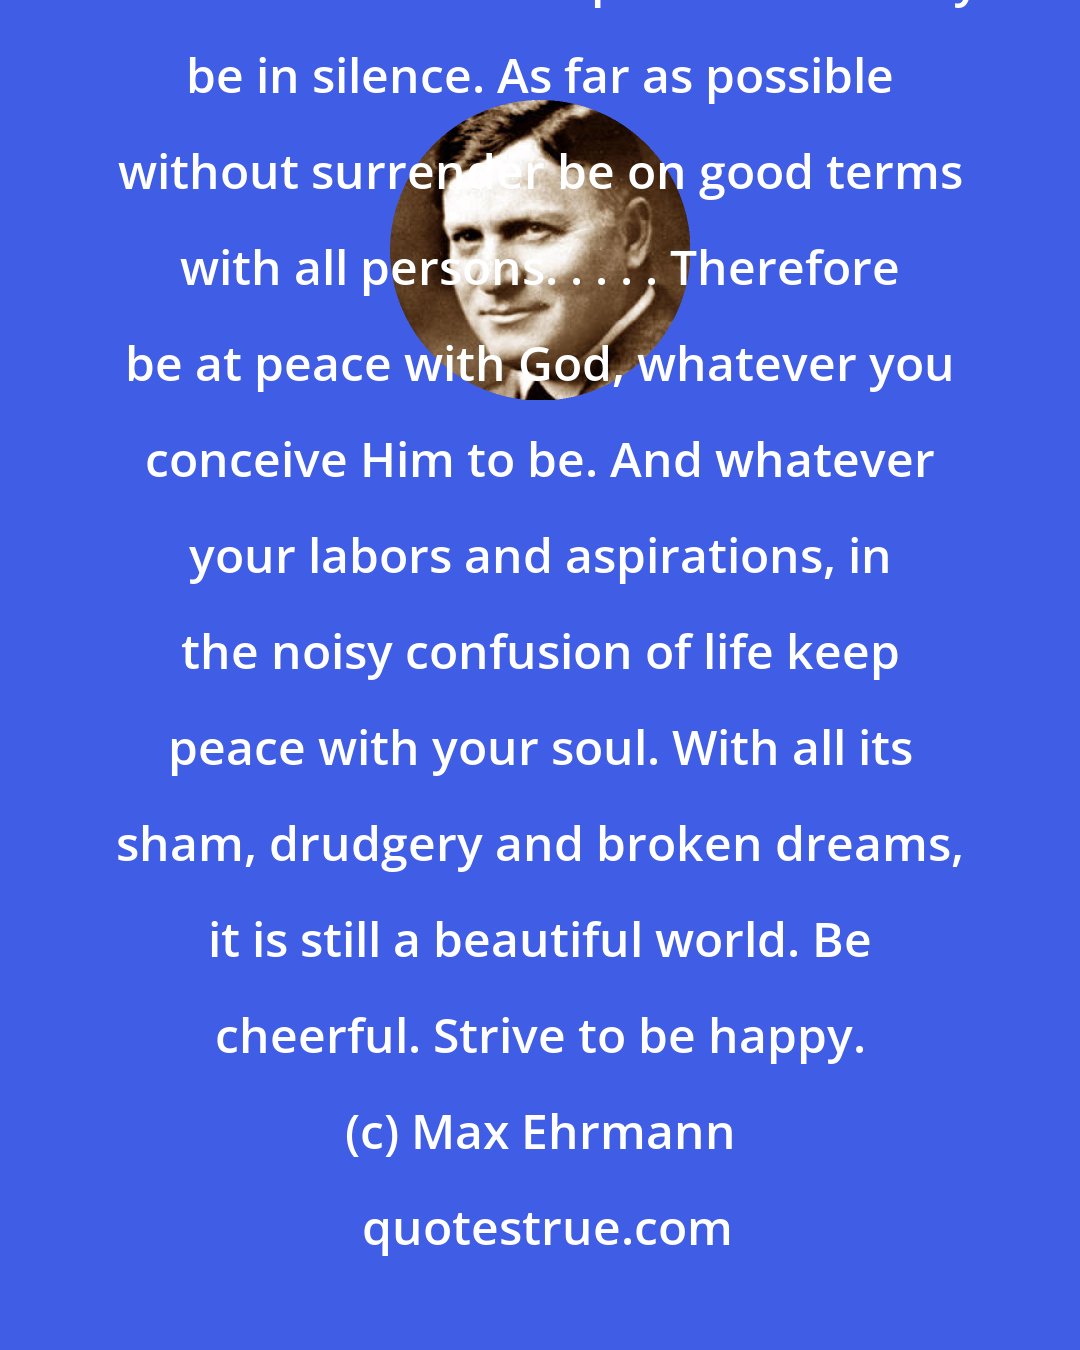 Max Ehrmann: Wishing you happiness always! Go placidly amid the noise and the haste, and remember what peace there may be in silence. As far as possible without surrender be on good terms with all persons. . . . . Therefore be at peace with God, whatever you conceive Him to be. And whatever your labors and aspirations, in the noisy confusion of life keep peace with your soul. With all its sham, drudgery and broken dreams, it is still a beautiful world. Be cheerful. Strive to be happy.